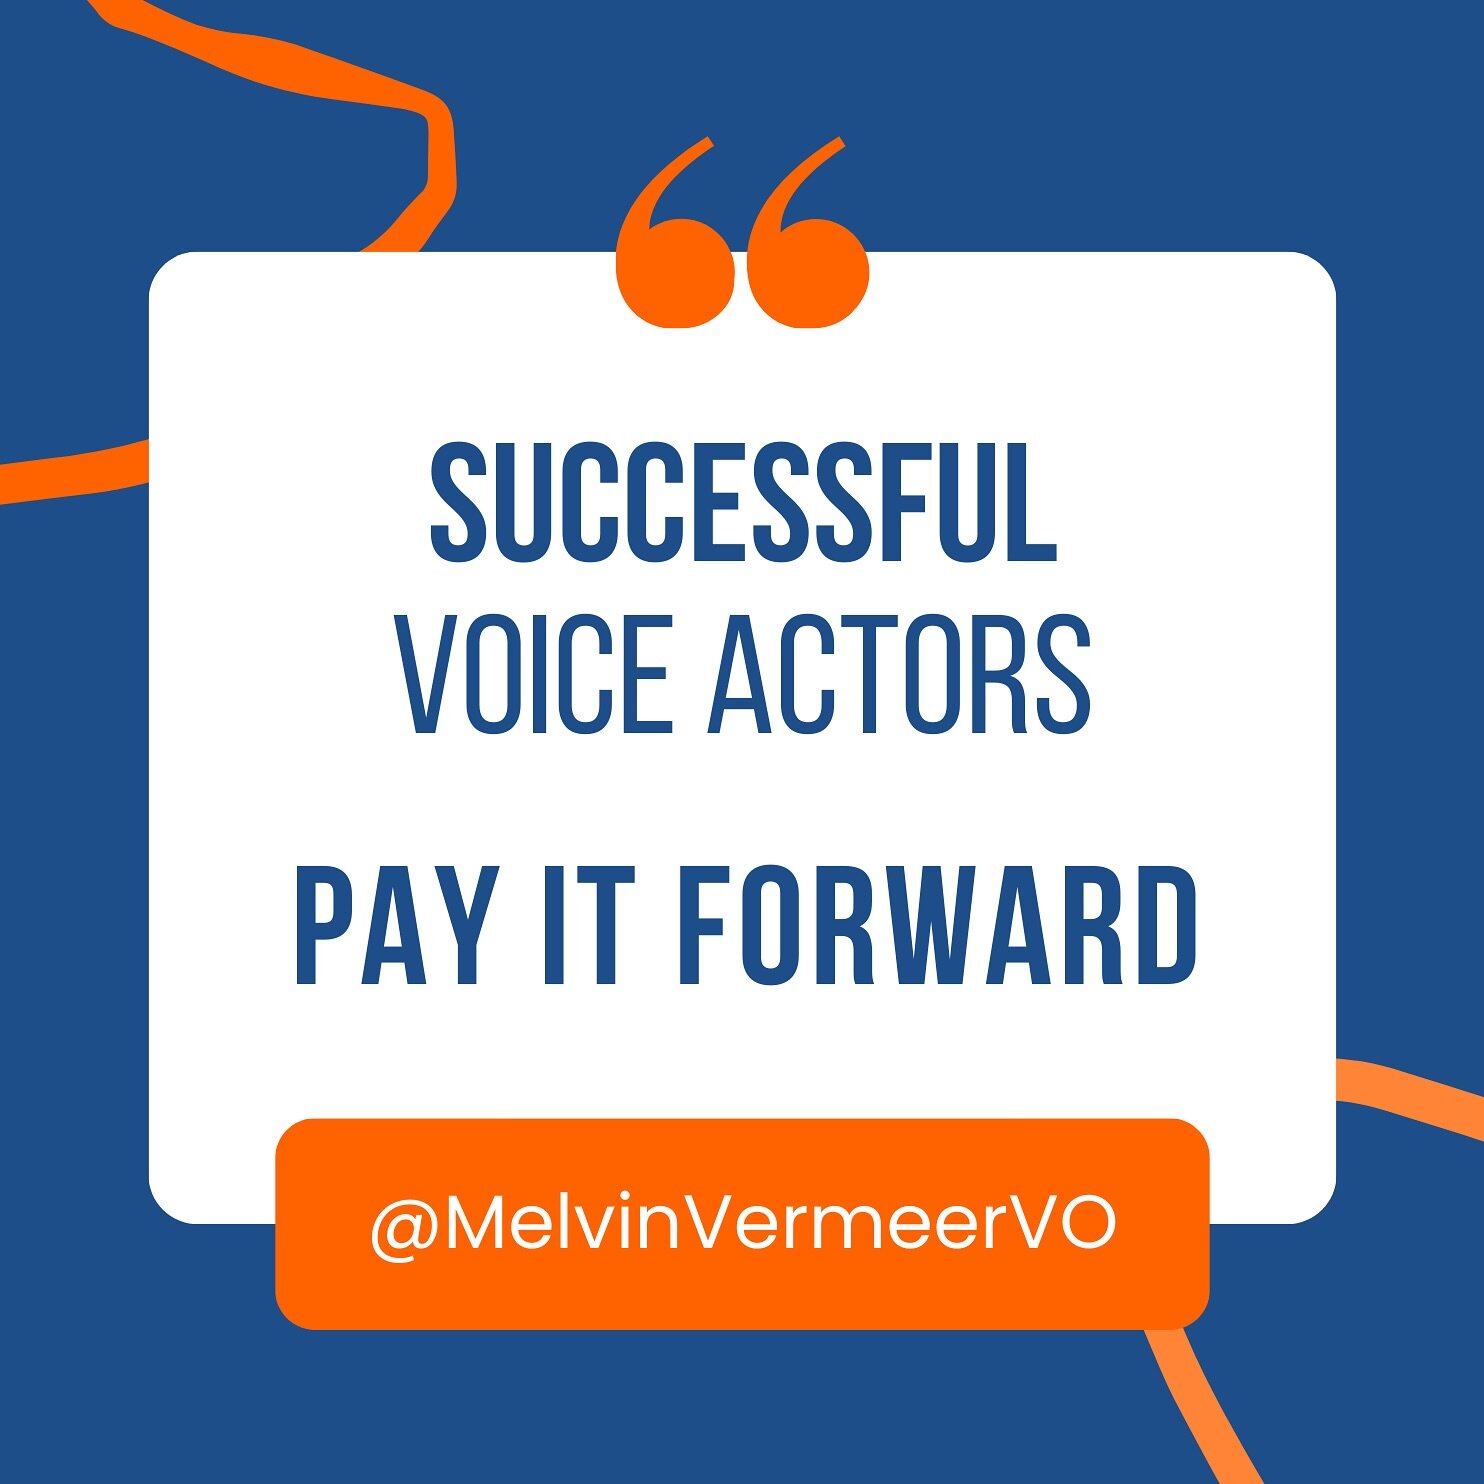 Over the years I have come across many inspiring people in the voiceover industry that &ldquo;lend&rdquo; a piece of their knowledge to others. I believe that the things we experience in life and our business is not only there to help us grow or educ